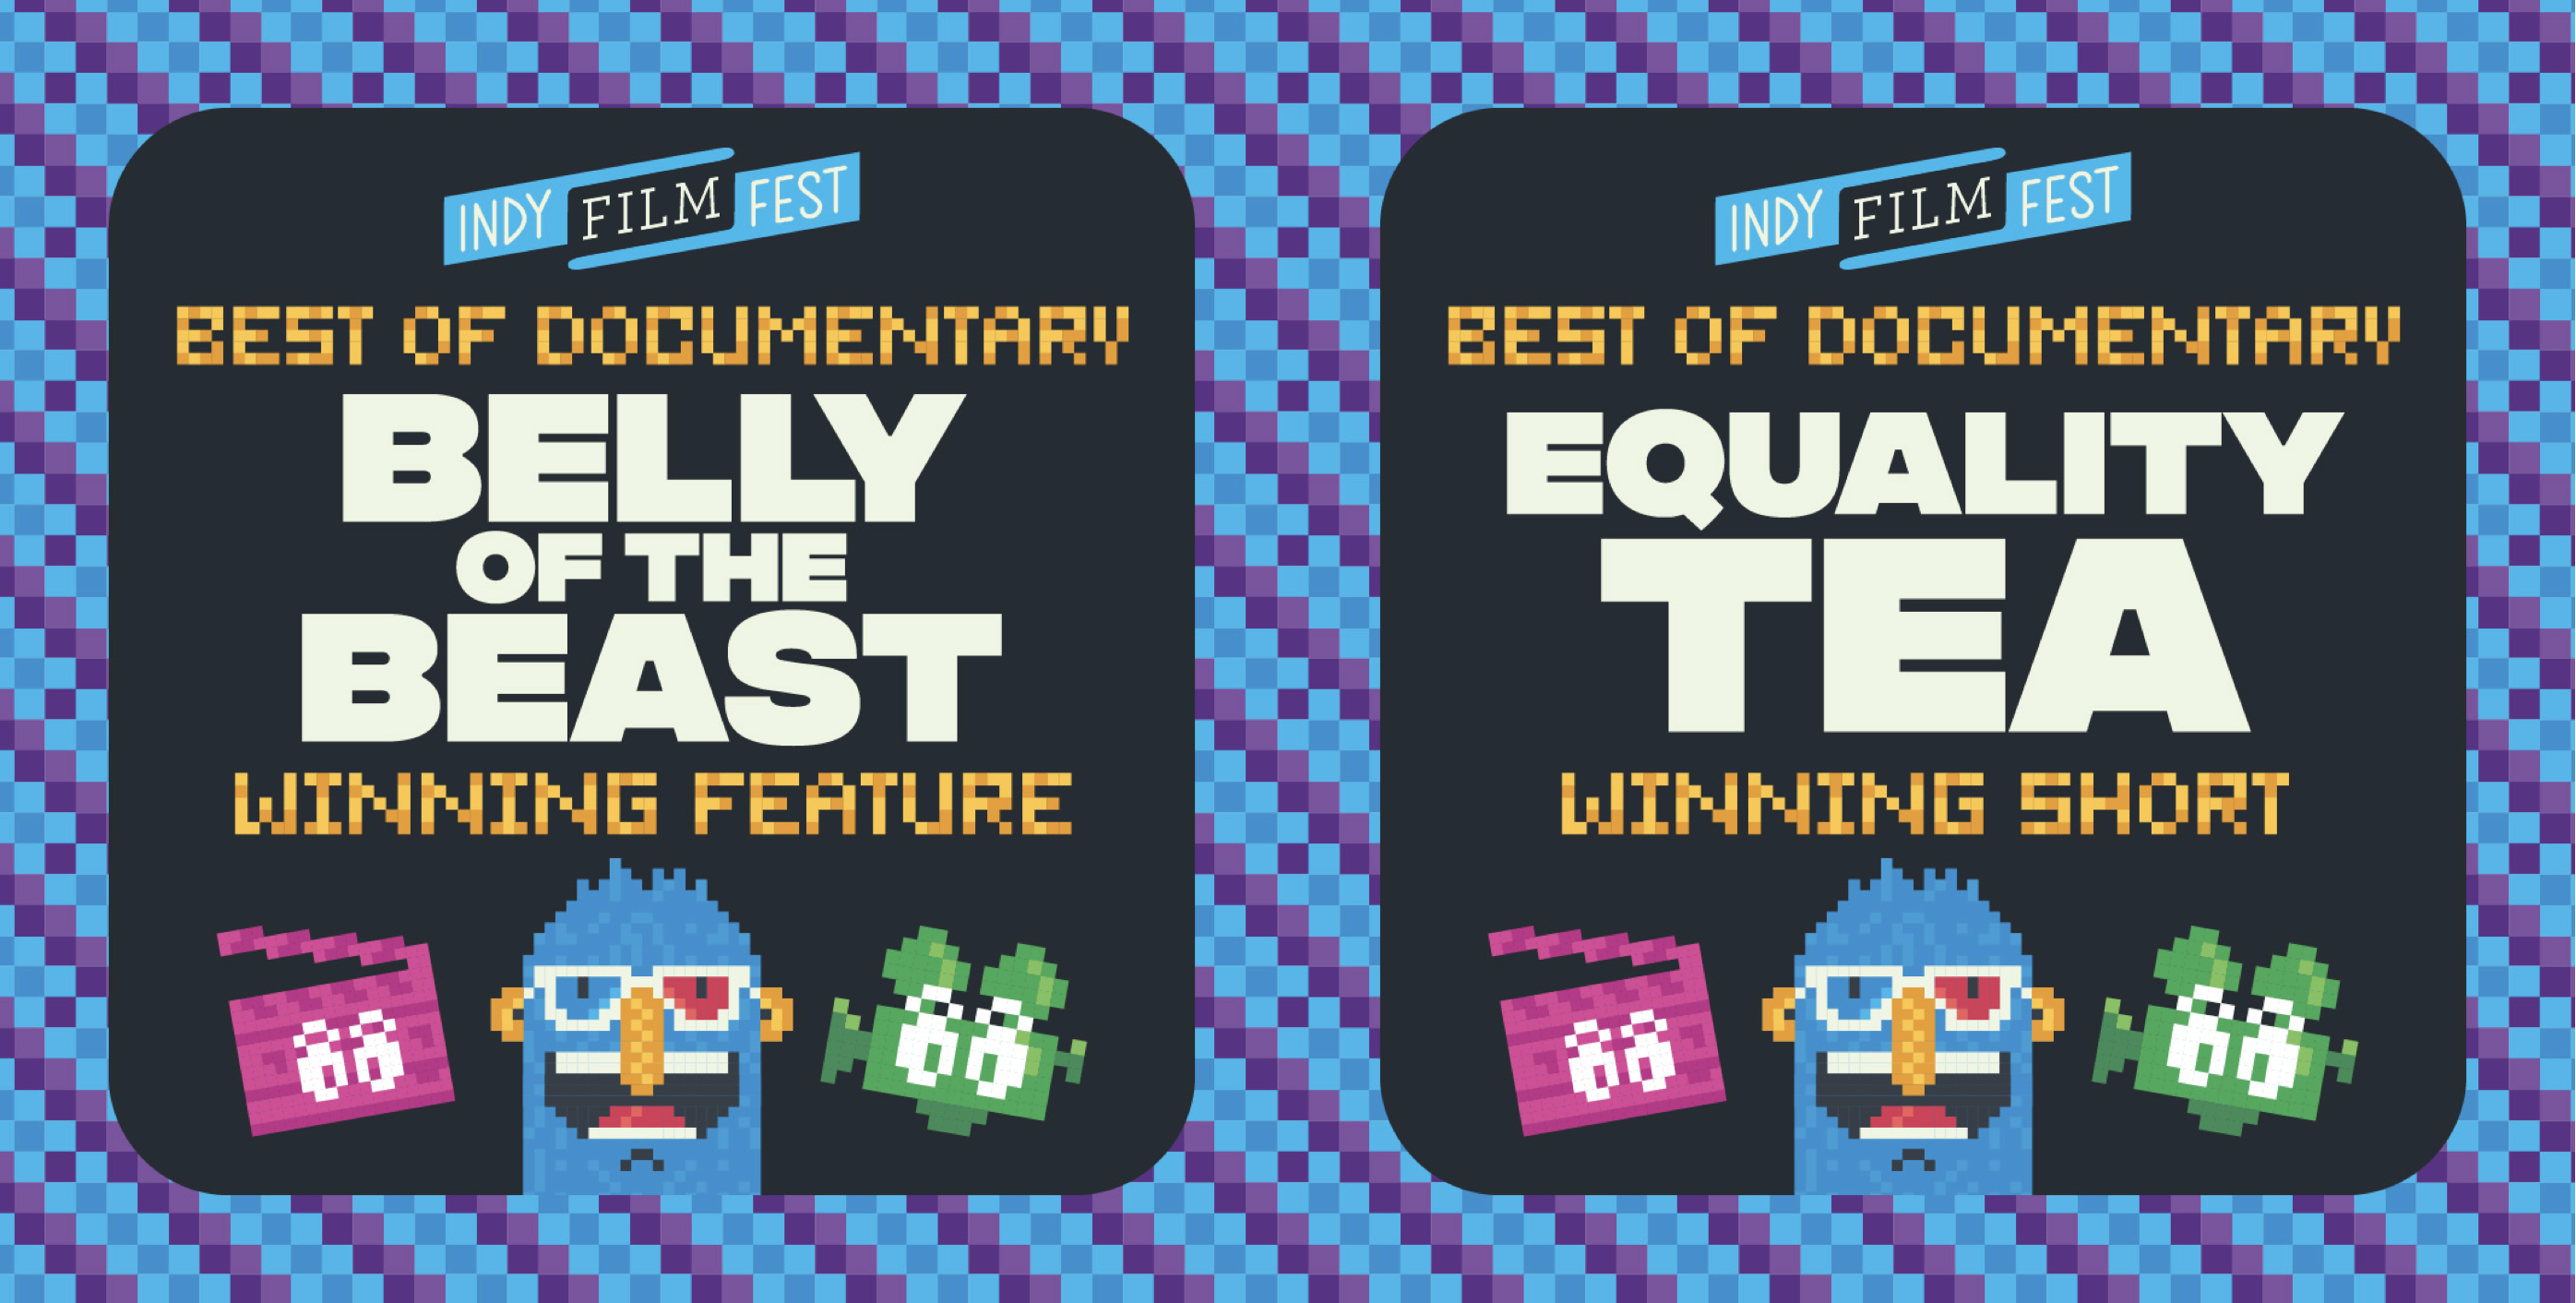 Best of Documentary: BELLY OF THE BEAST and EQUALITY TEA